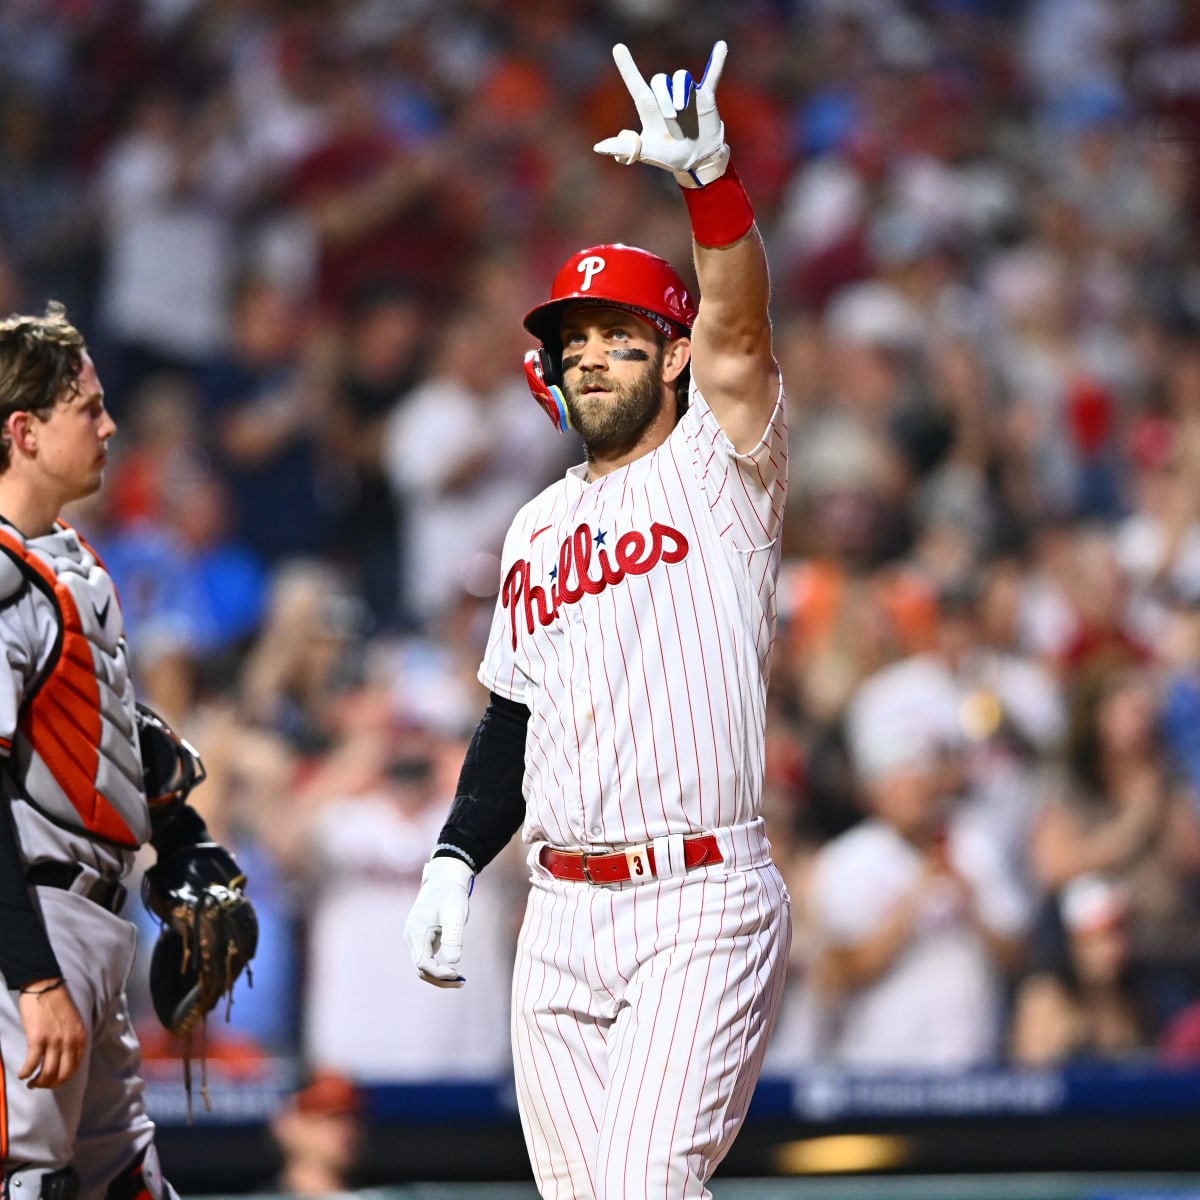 Bryce Harper joins 2023 Phillies Spring Training